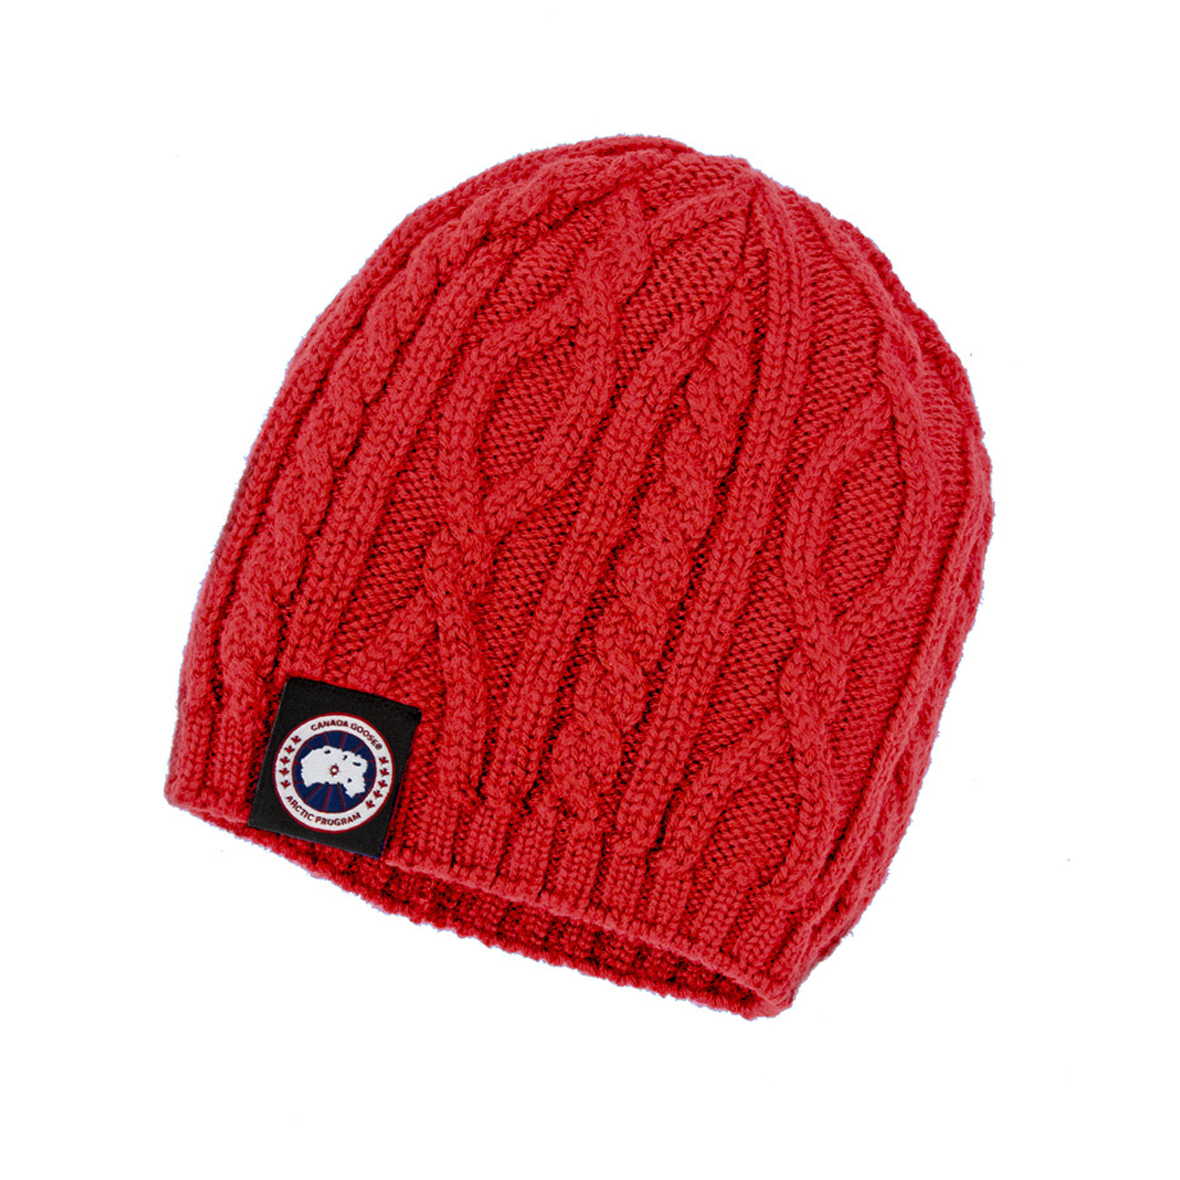 Canada Goose Unisex Merino Cable-Knit Beanie RED